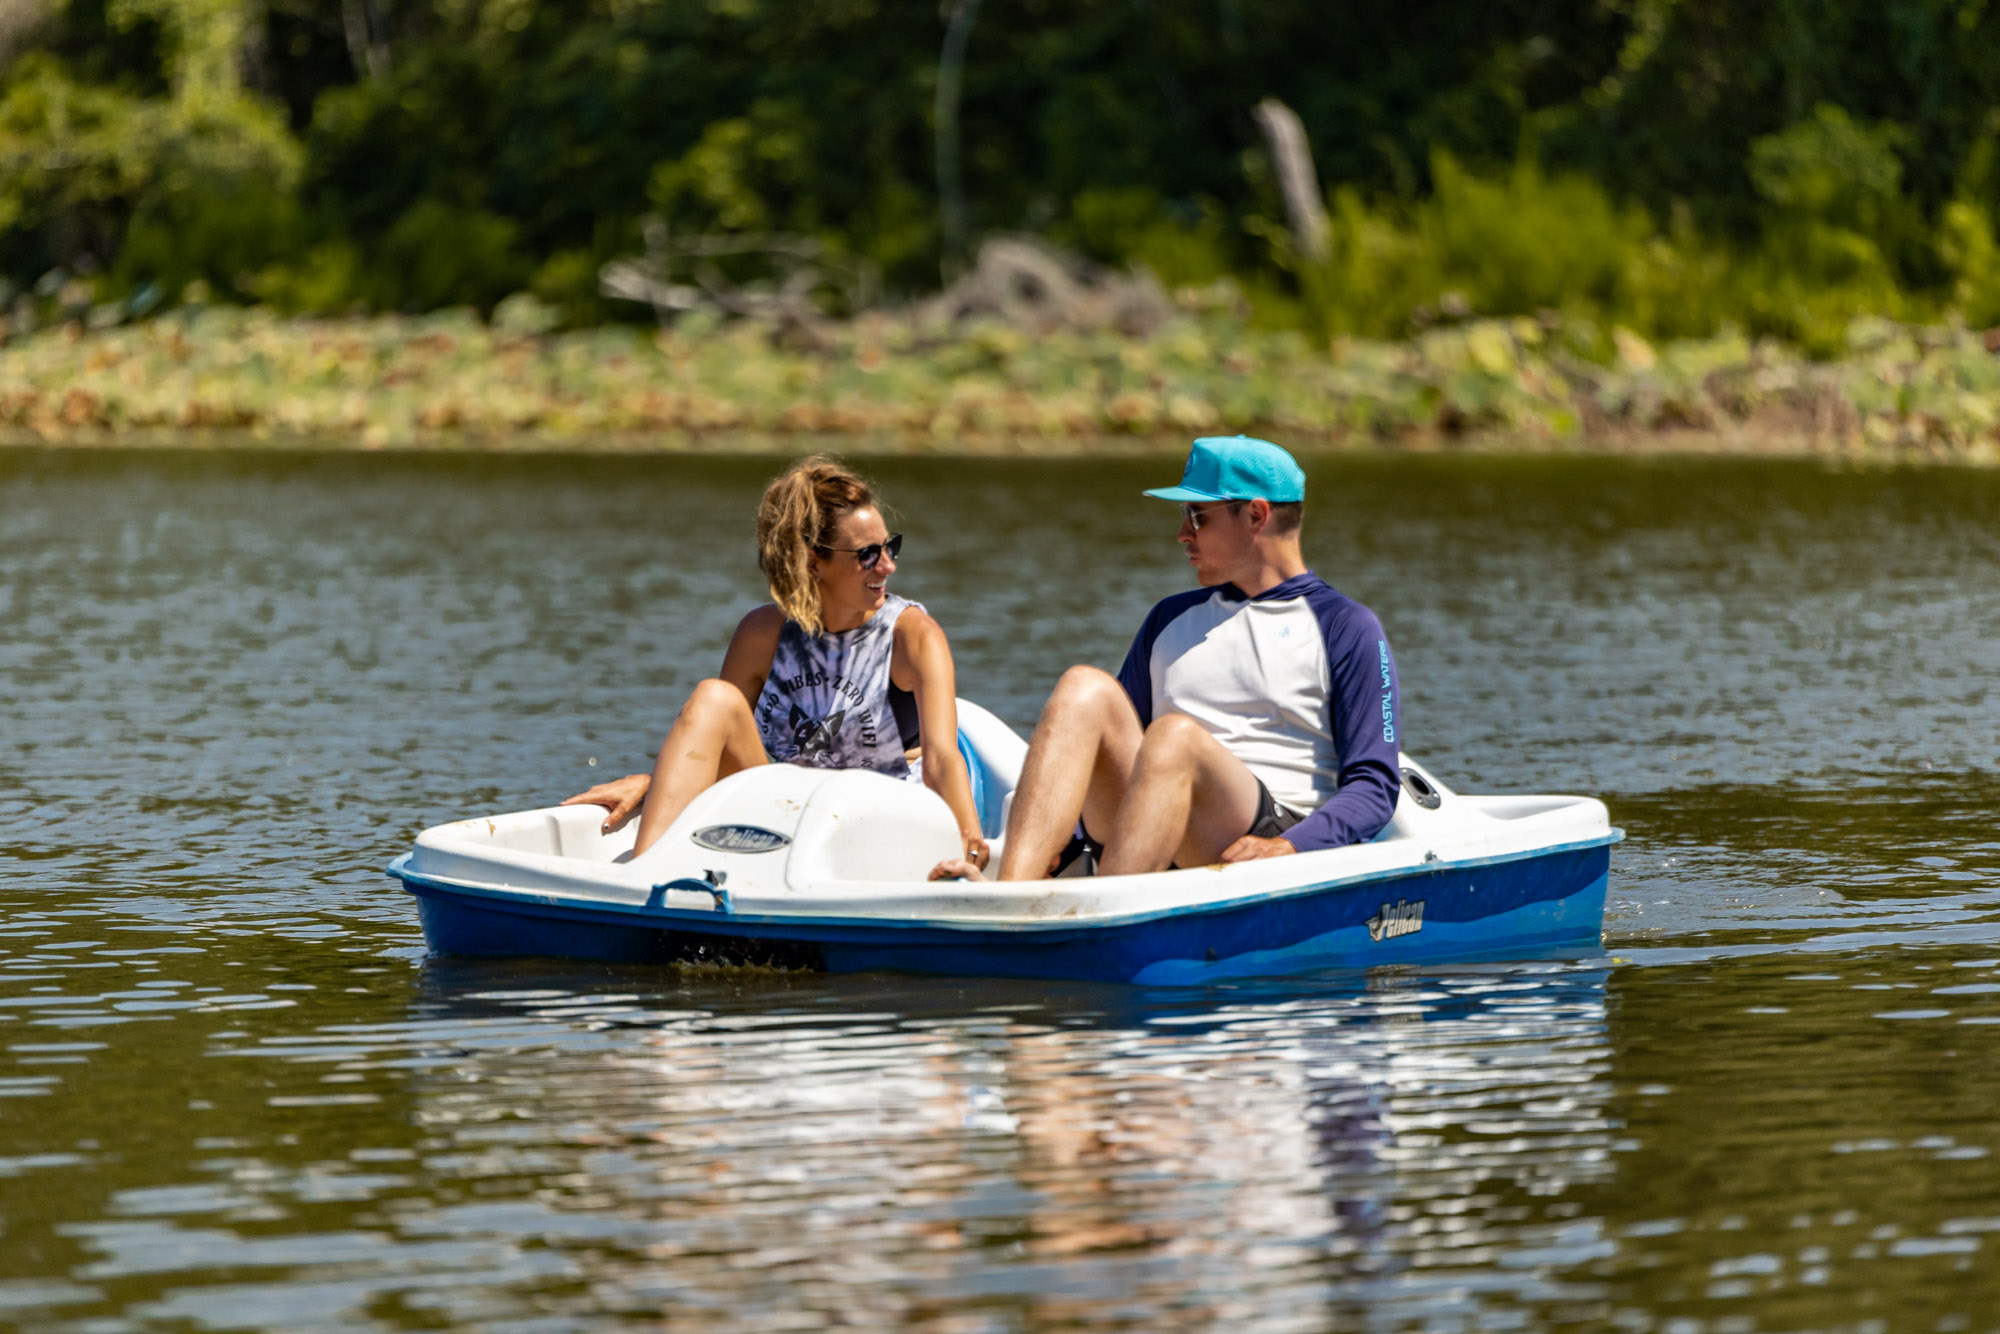 Man and woman riding in a pedal boat on a lake.